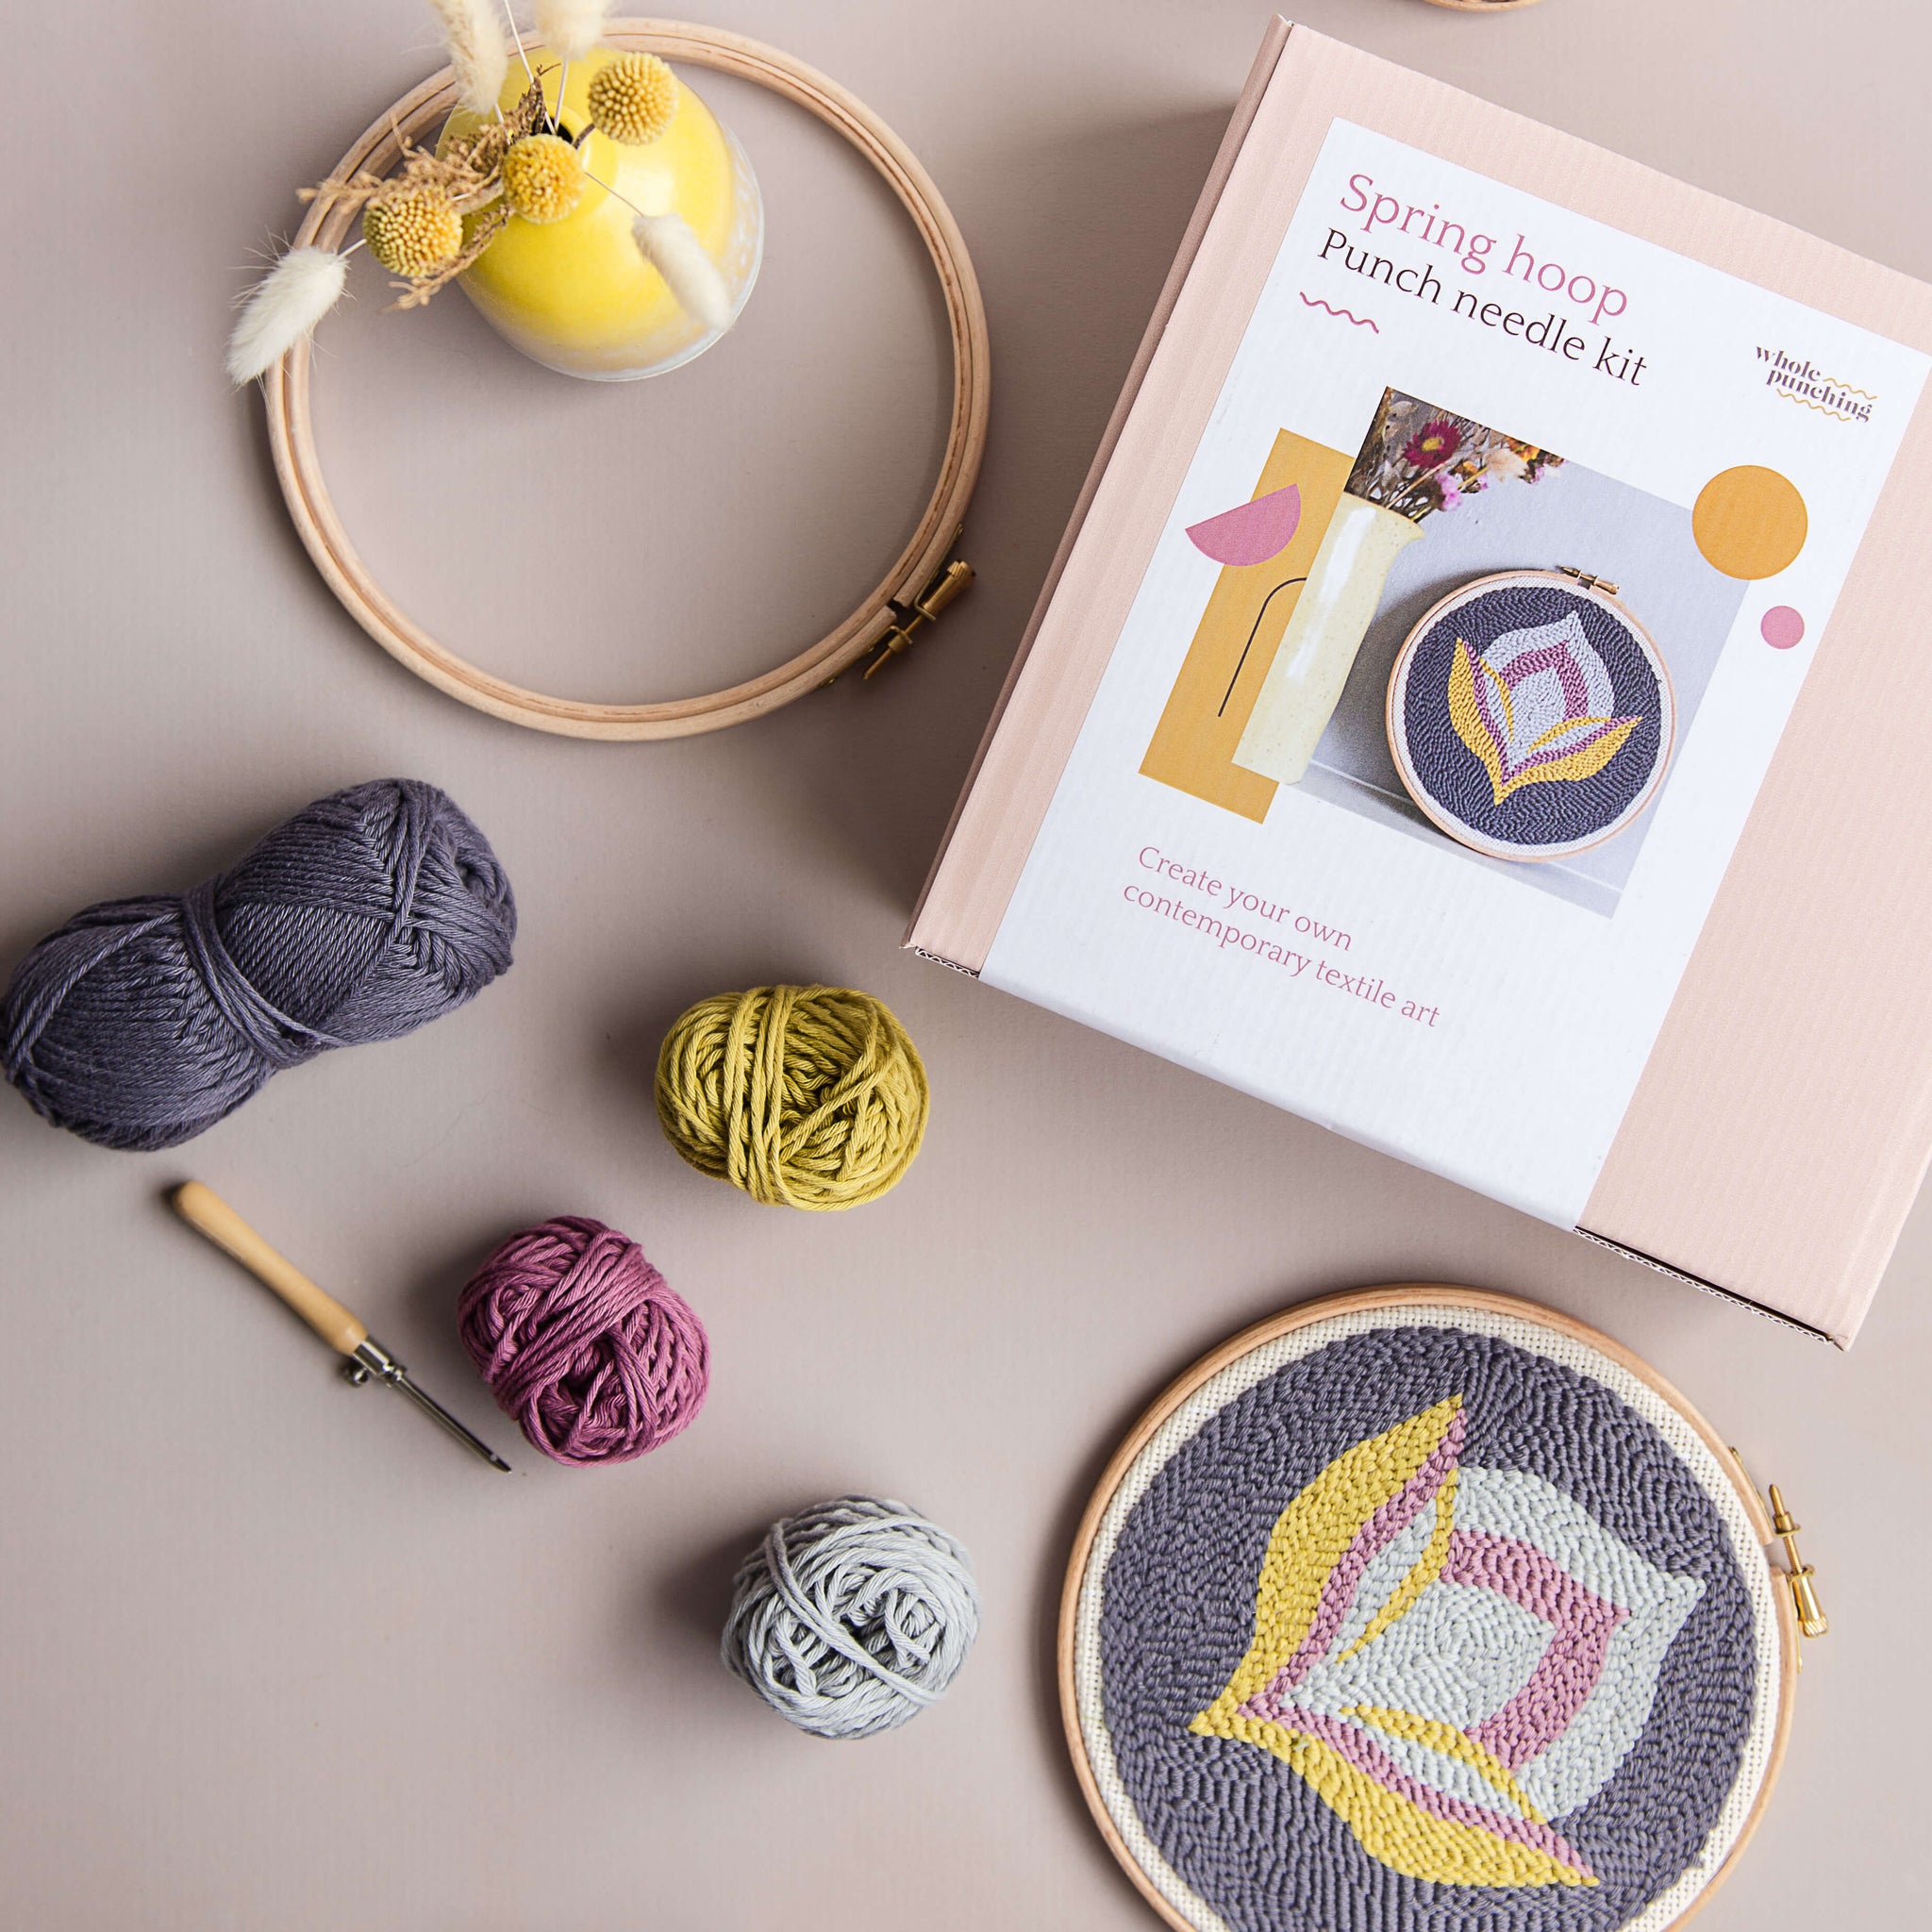 Celestial Punch Needle Kit by Wholepunching – All About The Yarn